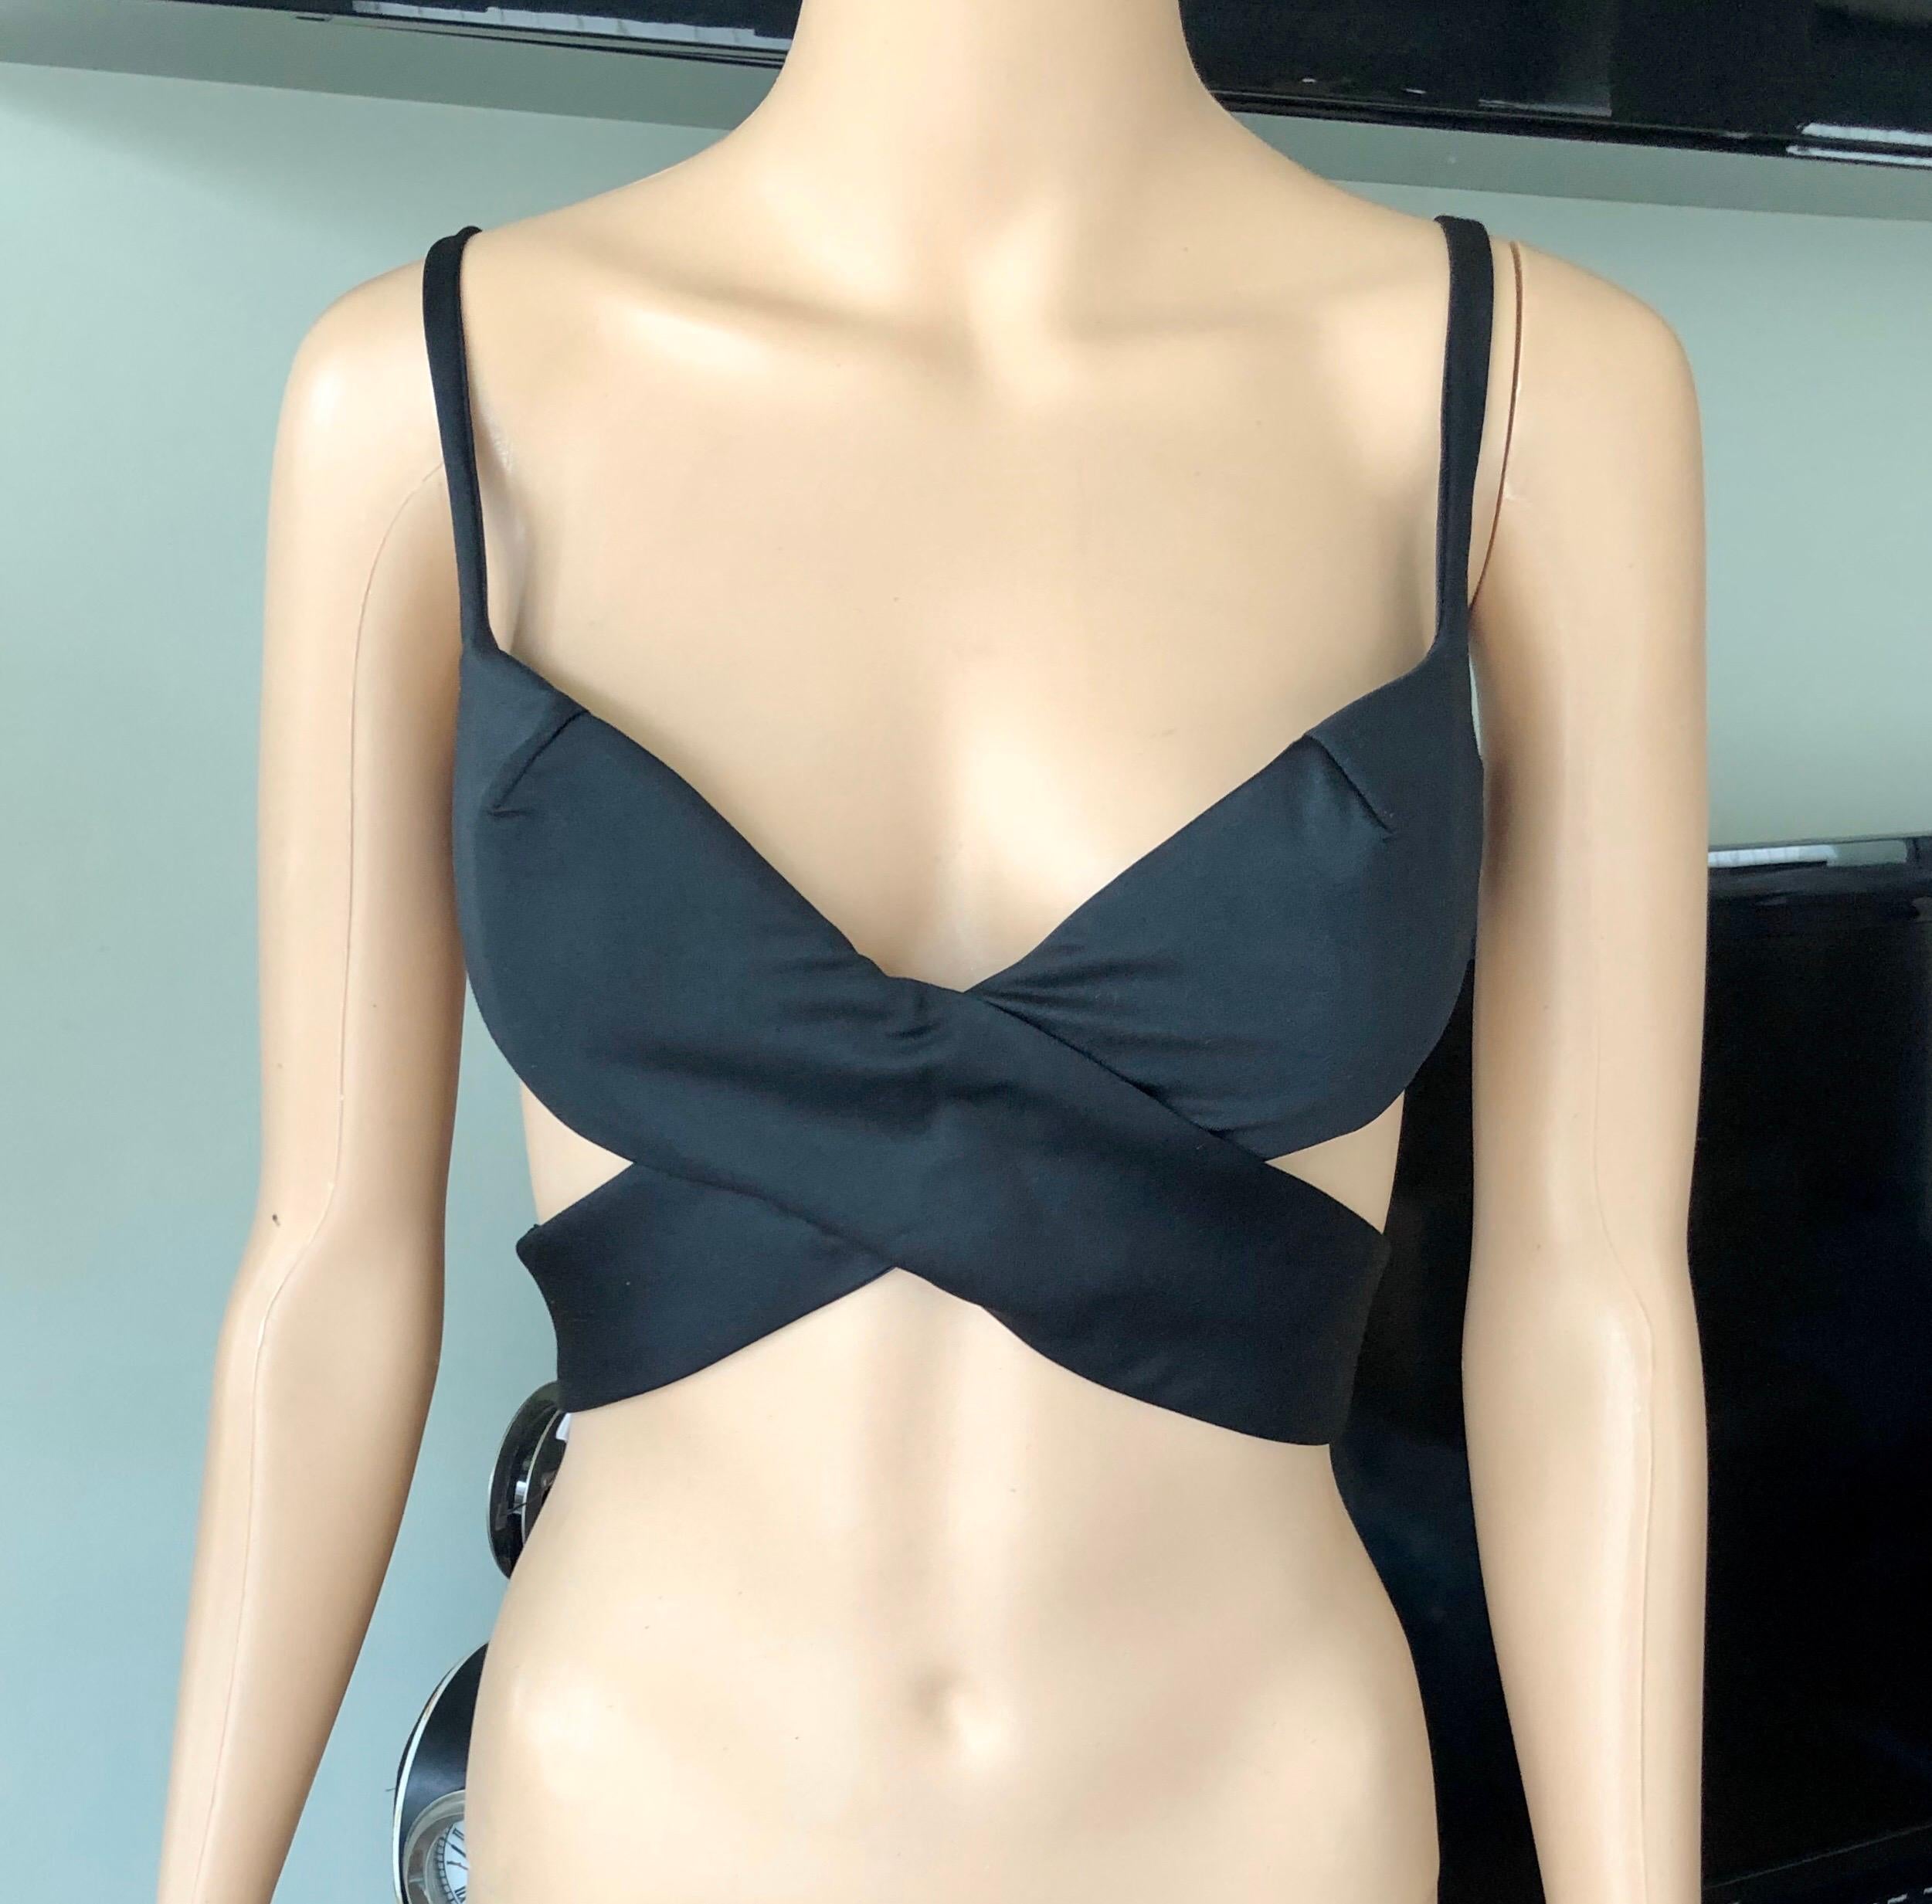 Women's Tom Ford for Gucci S/S 2001 Runway Cutout Black Bustier Crop Top